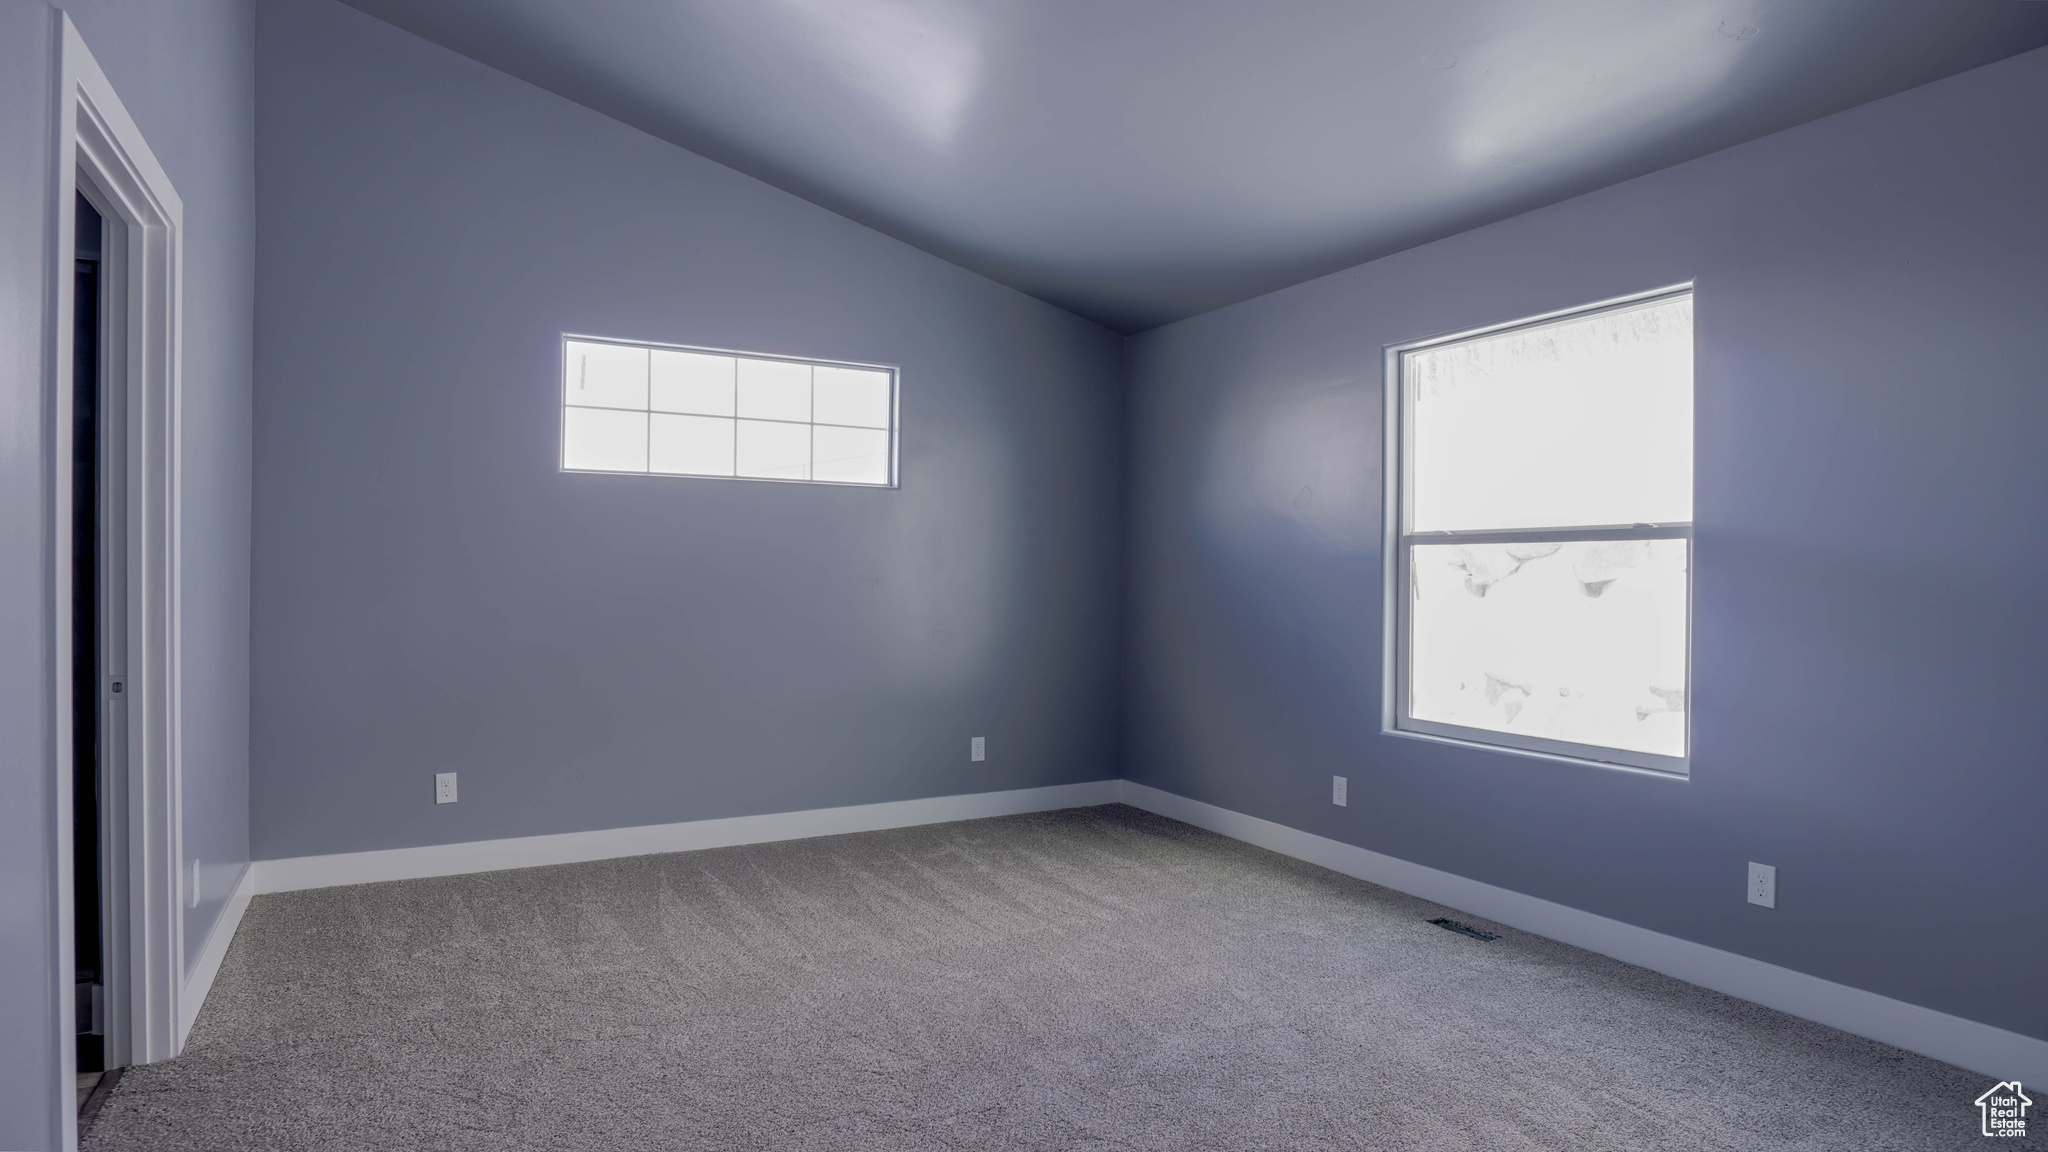 Carpeted empty room featuring lofted ceiling and a healthy amount of sunlight